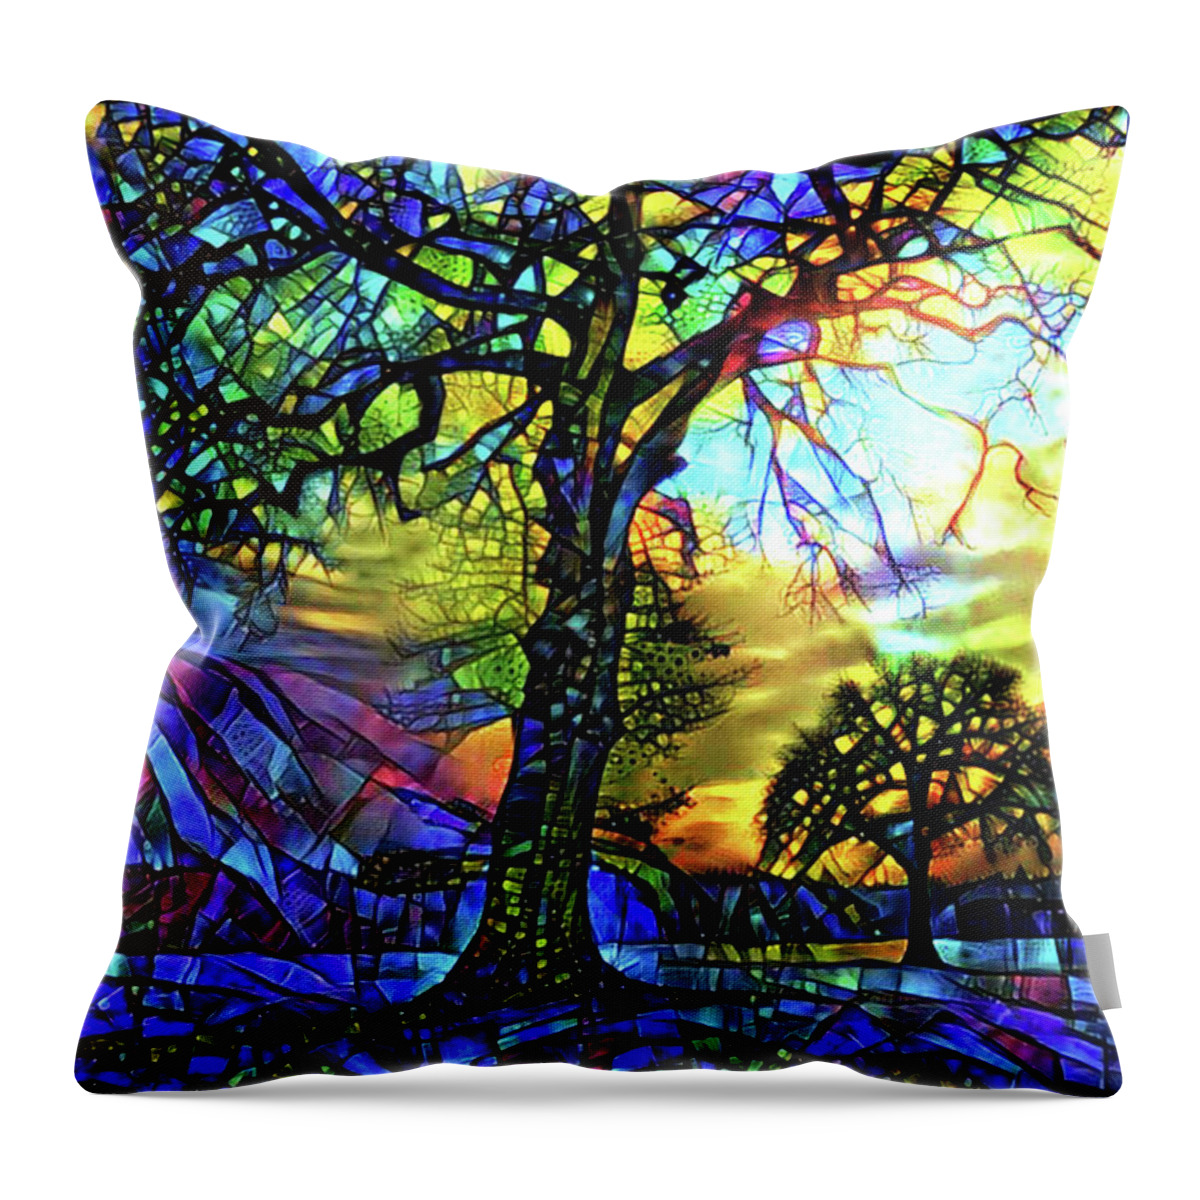 Stained Glass Throw Pillow featuring the digital art Trees - Stained Glass by Peggy Collins